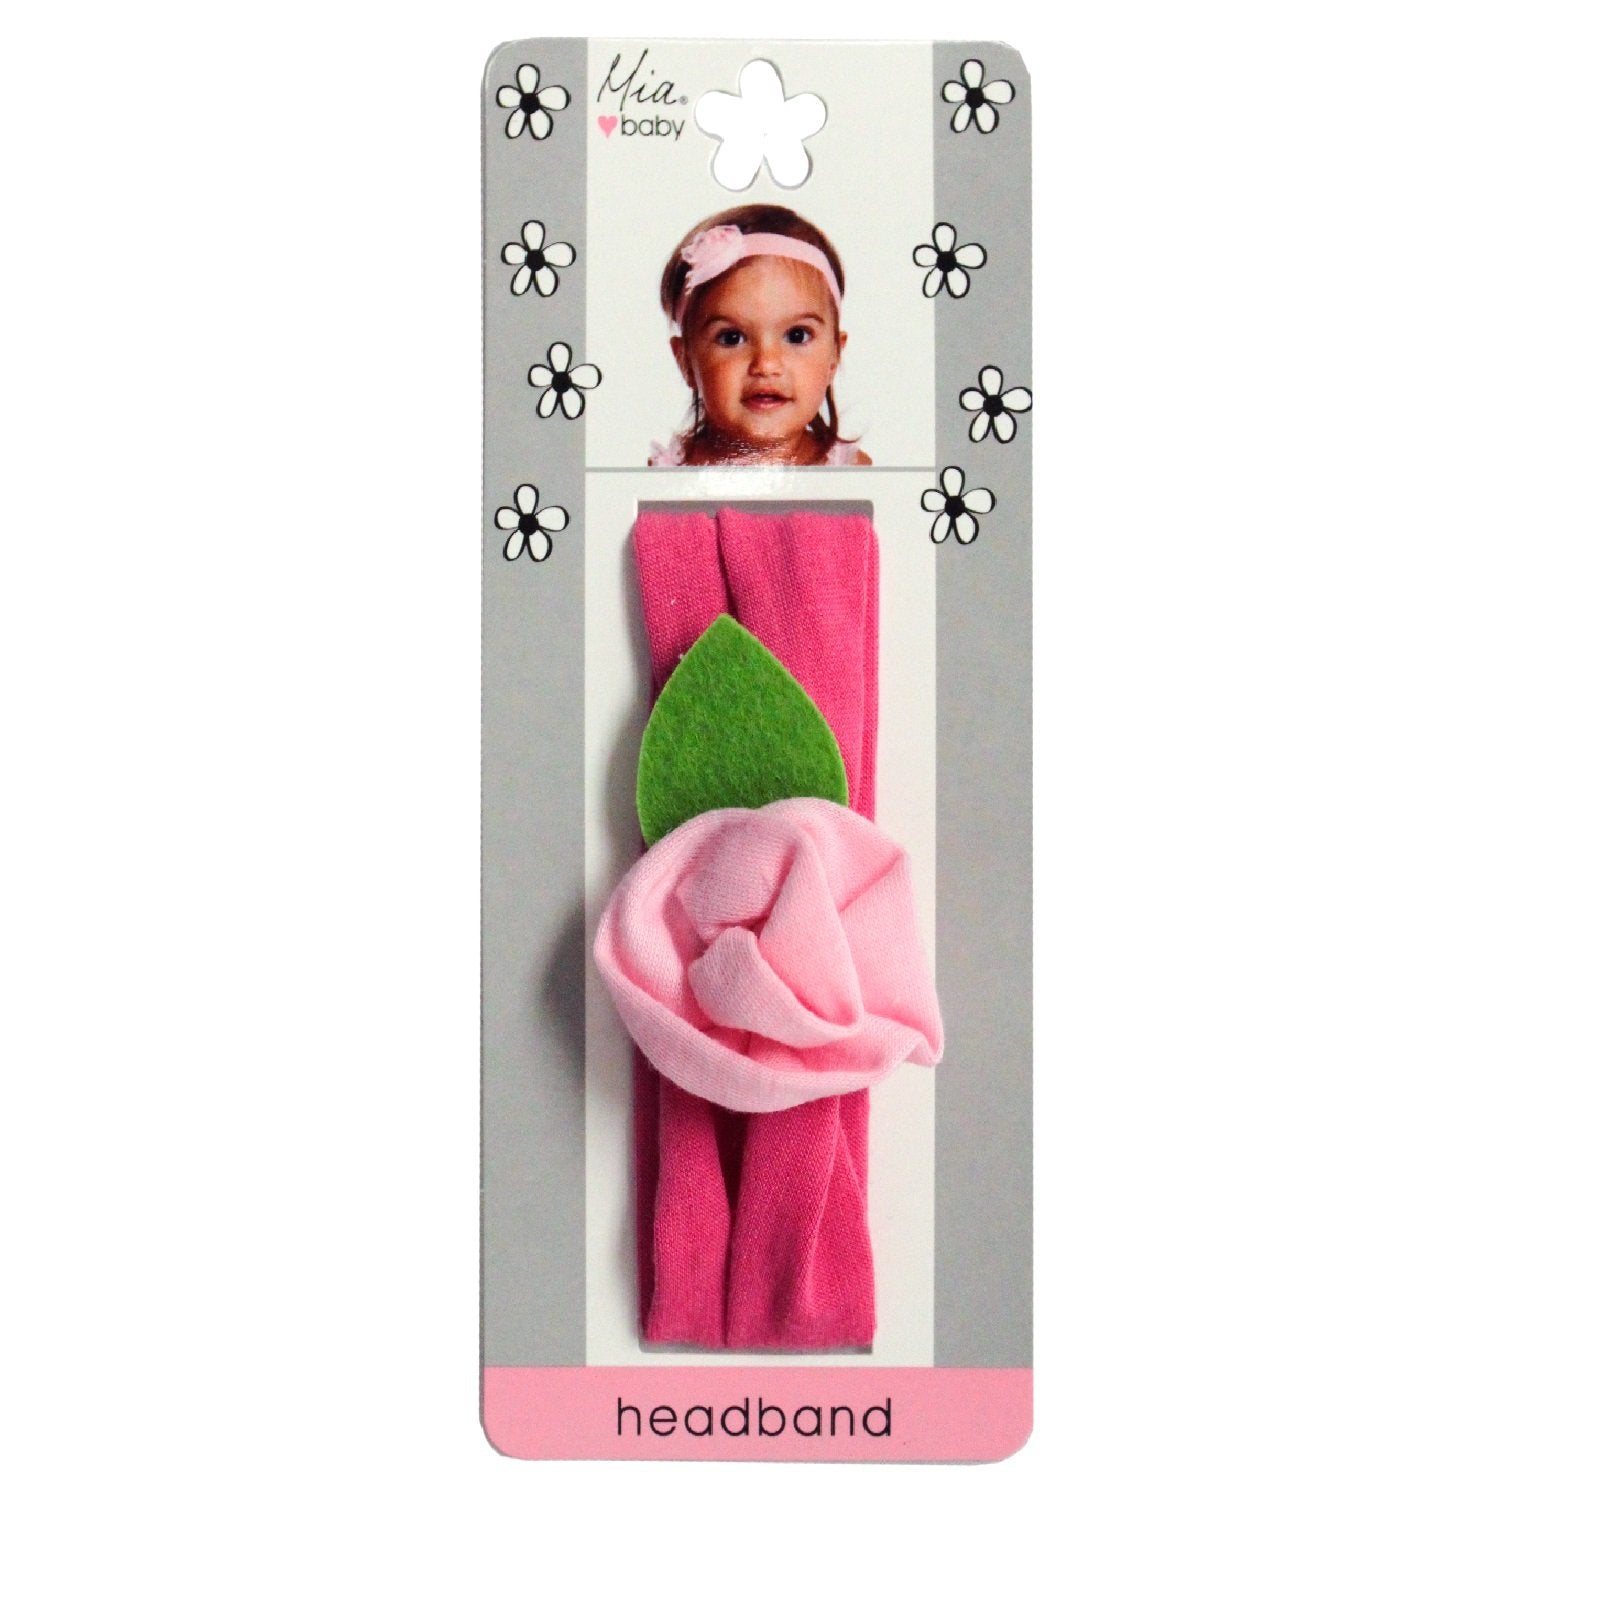 Mia® Baby Jersey Flower Headband - hot pink band with light pink flower - shown on packaging - invented by #MiaKaminski #MiaBeauty #Mia #Beauty #Baby #hair #hairaccessories #hairclips #hairbarrettes #love #life #girl #woman